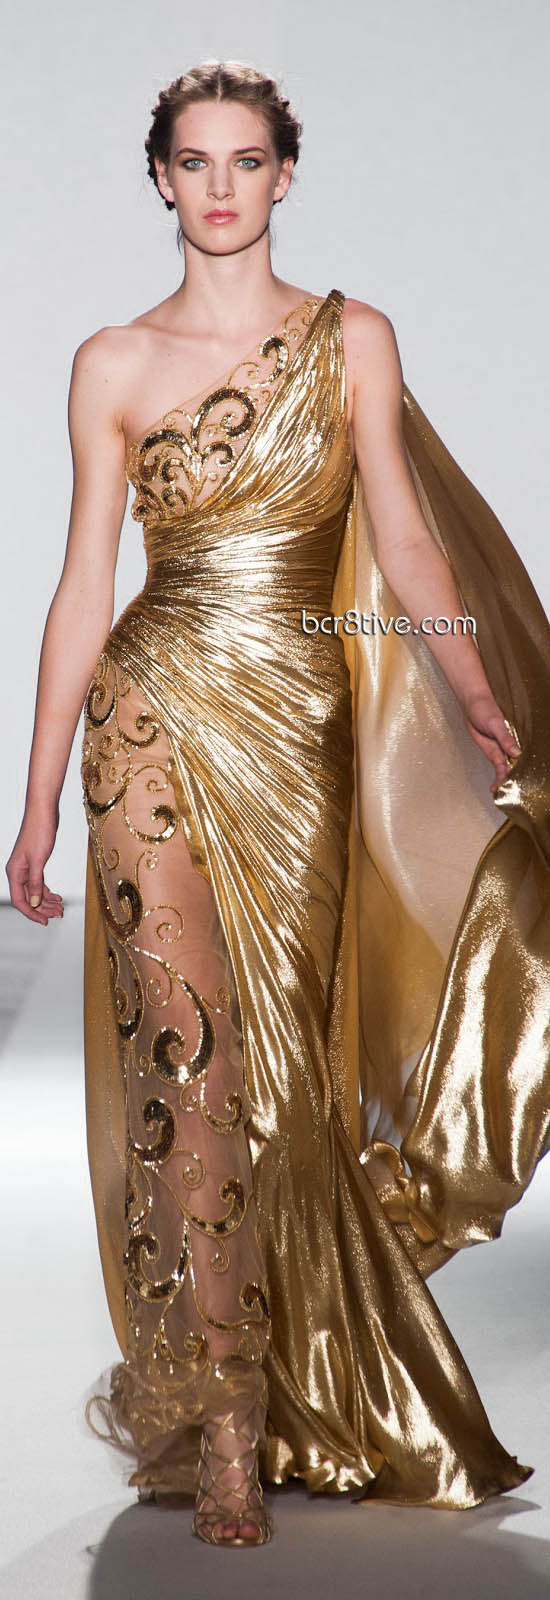 Zuhair Murad Spring Summer 2013 Haute Couture Collection – Be Creative